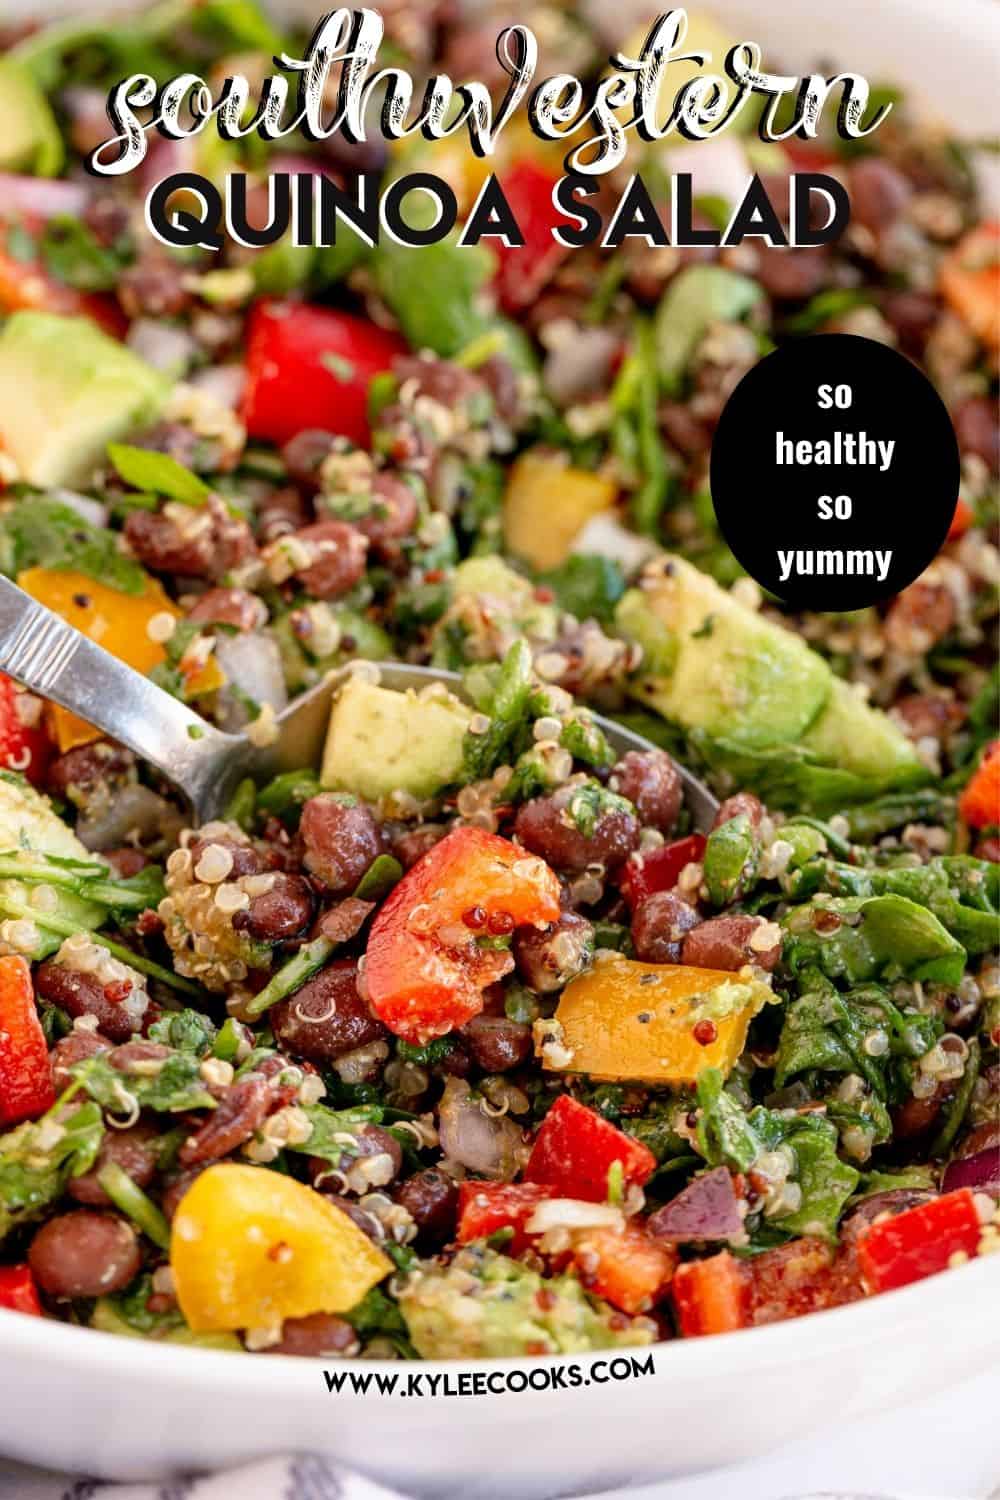 southwest quinoa salad with recipe title overlaid in text